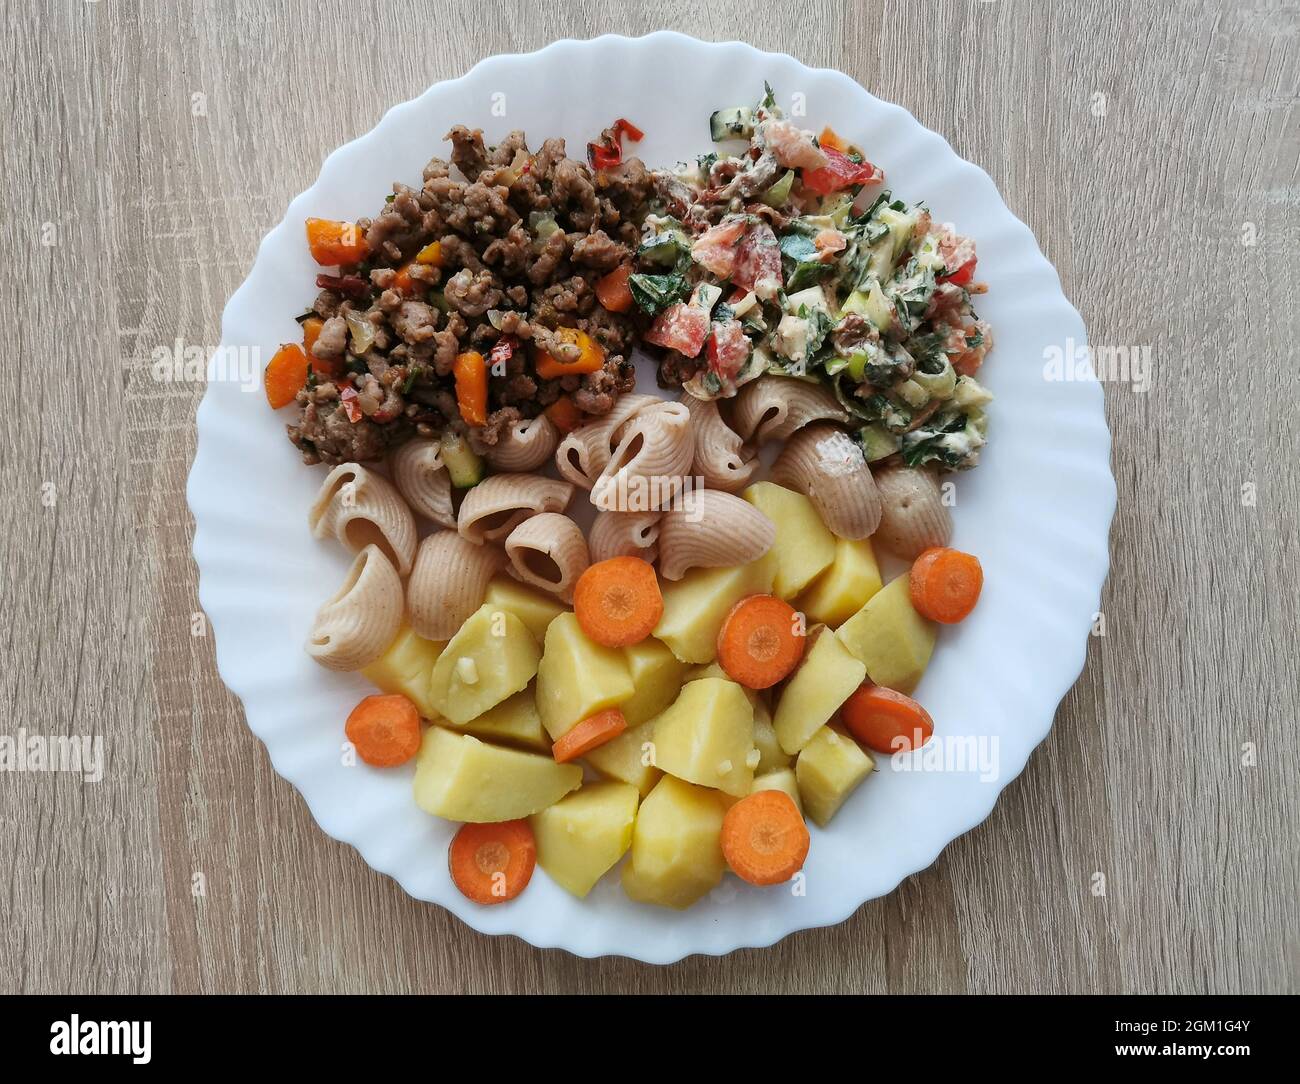 Whole grain pasta with potatoes, carrots and a vegetable salad Stock Photo